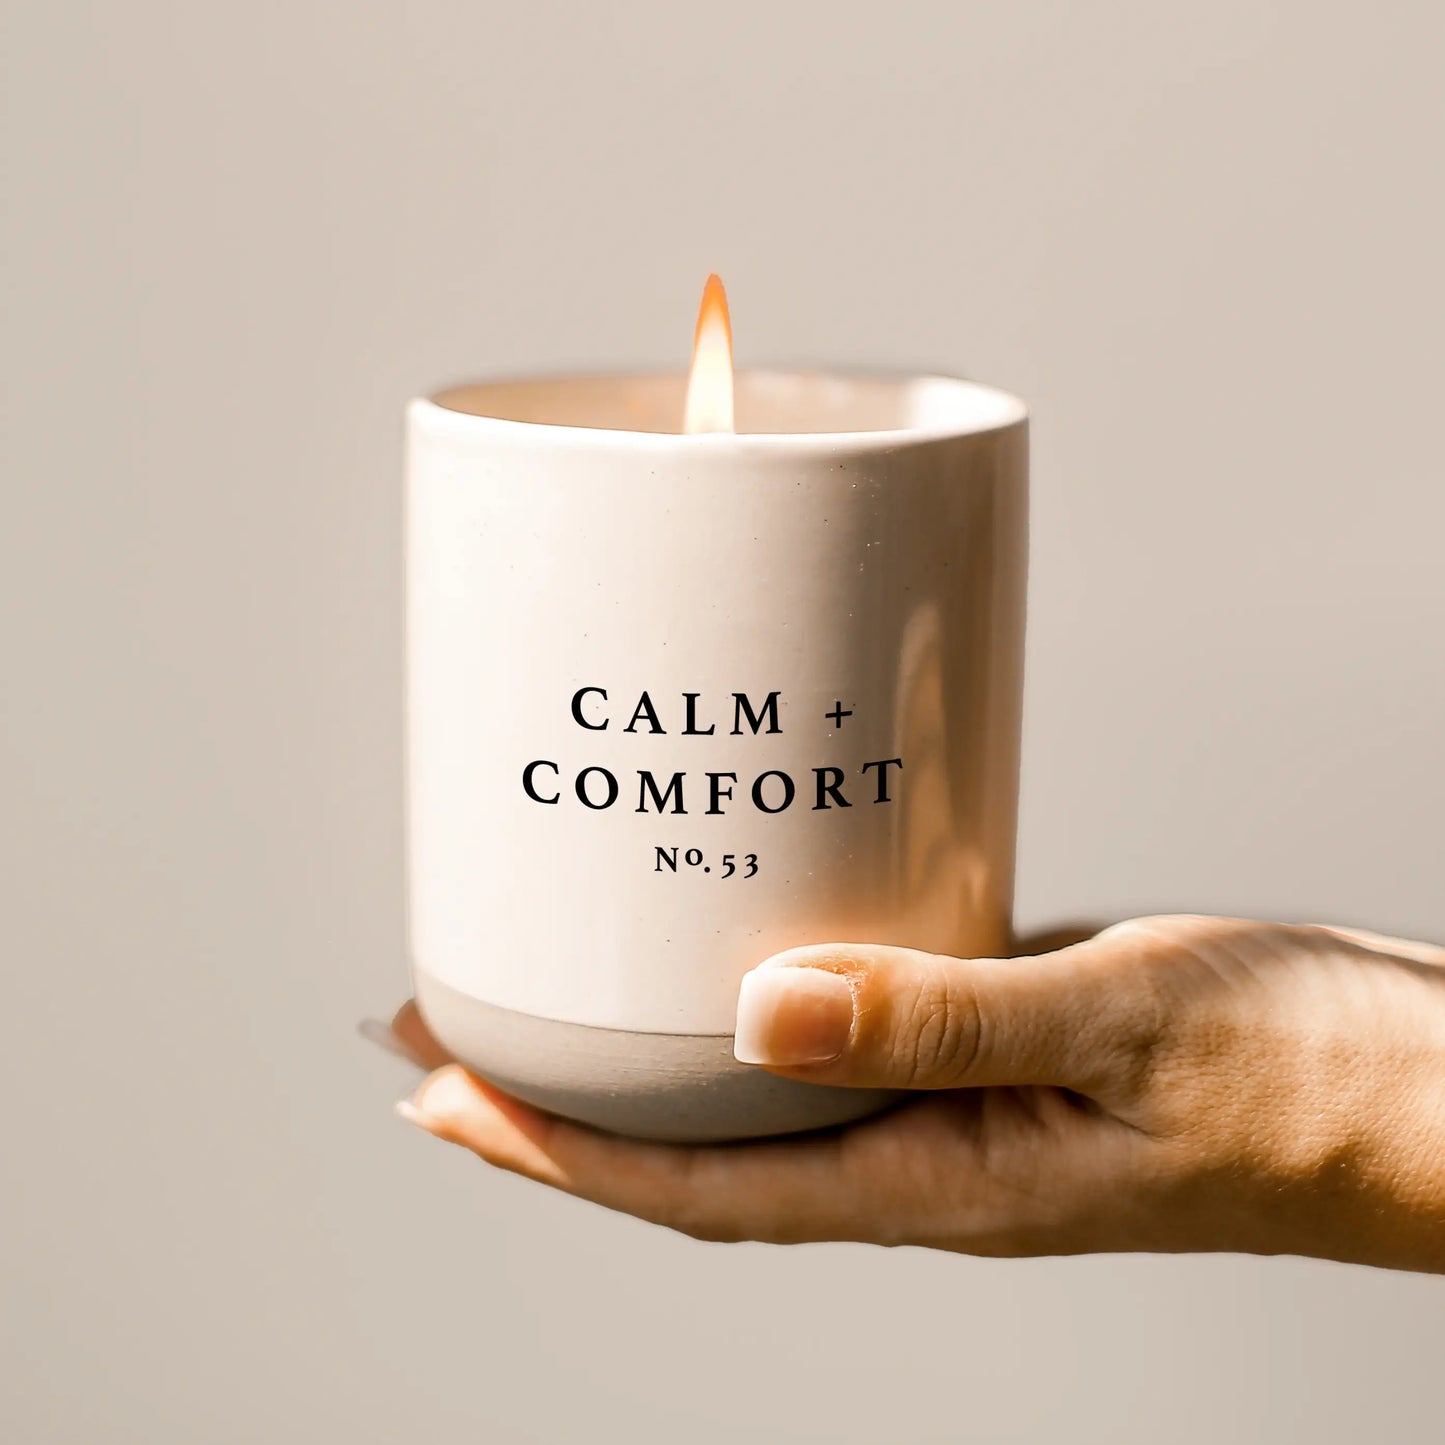 Calm and Comfort Soy Candle - Cream Stoneware Jar - 12 oz